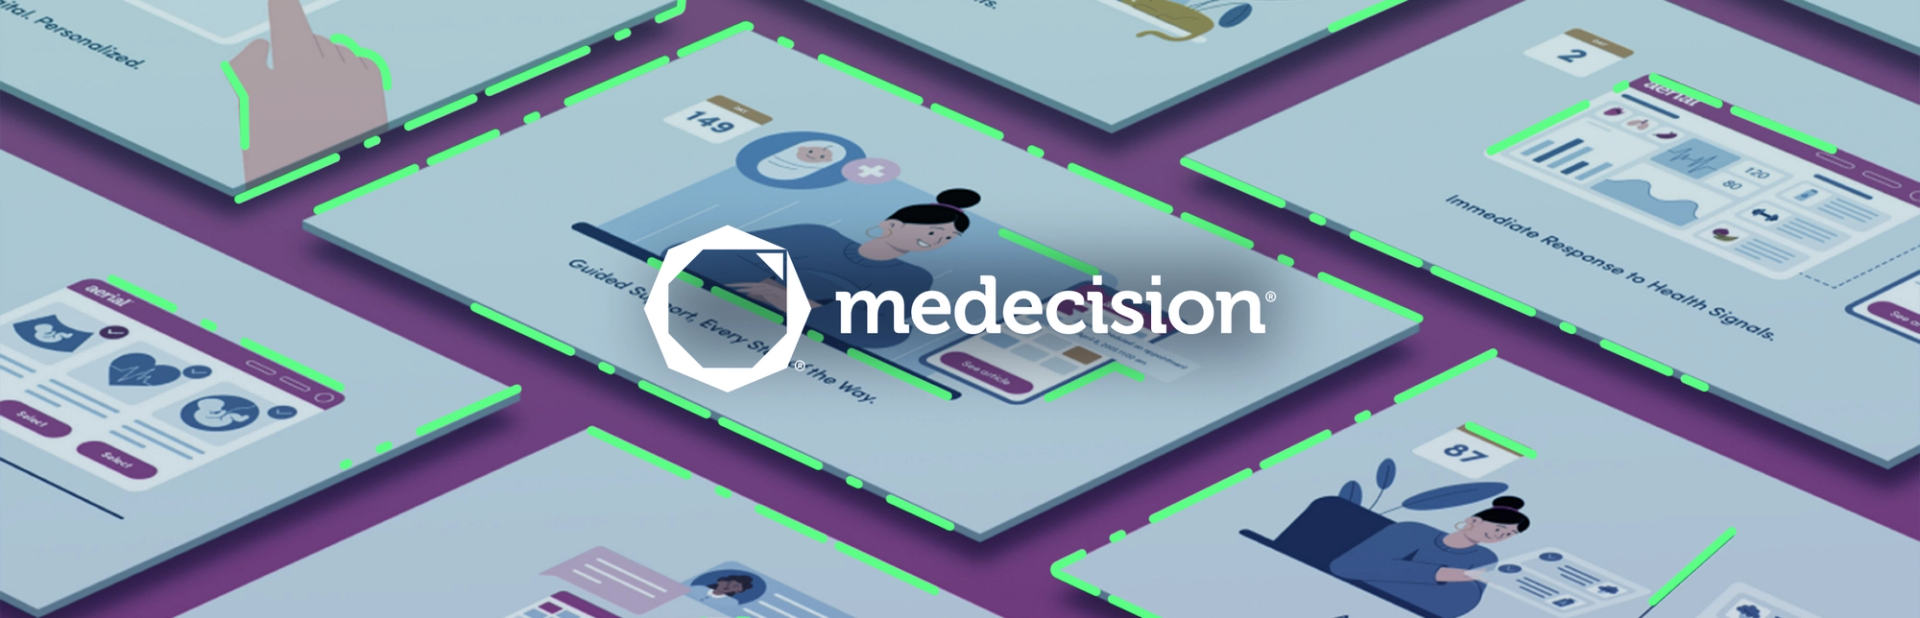 Medecision and Superside: Illustrating Healthcare Innovation Through Animation